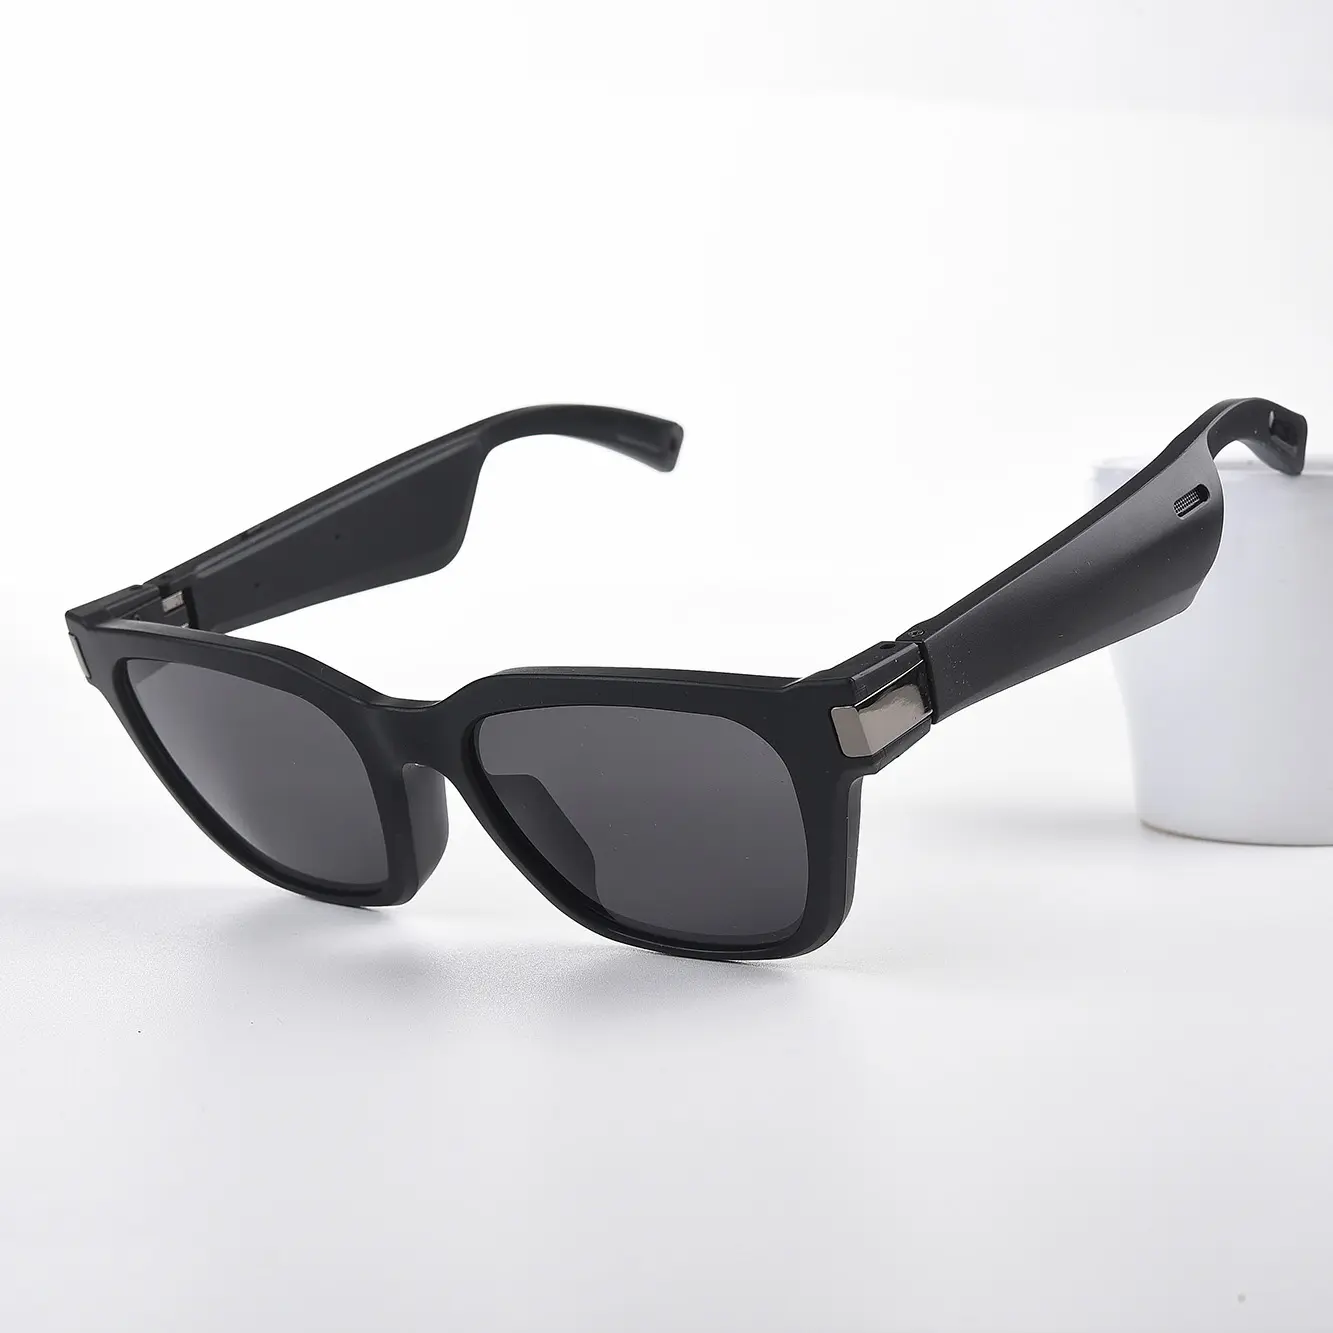 F002 Smart Glasses Android For Connecting Phone Play Music And Reply Calling Smart Headphone Sunglasses